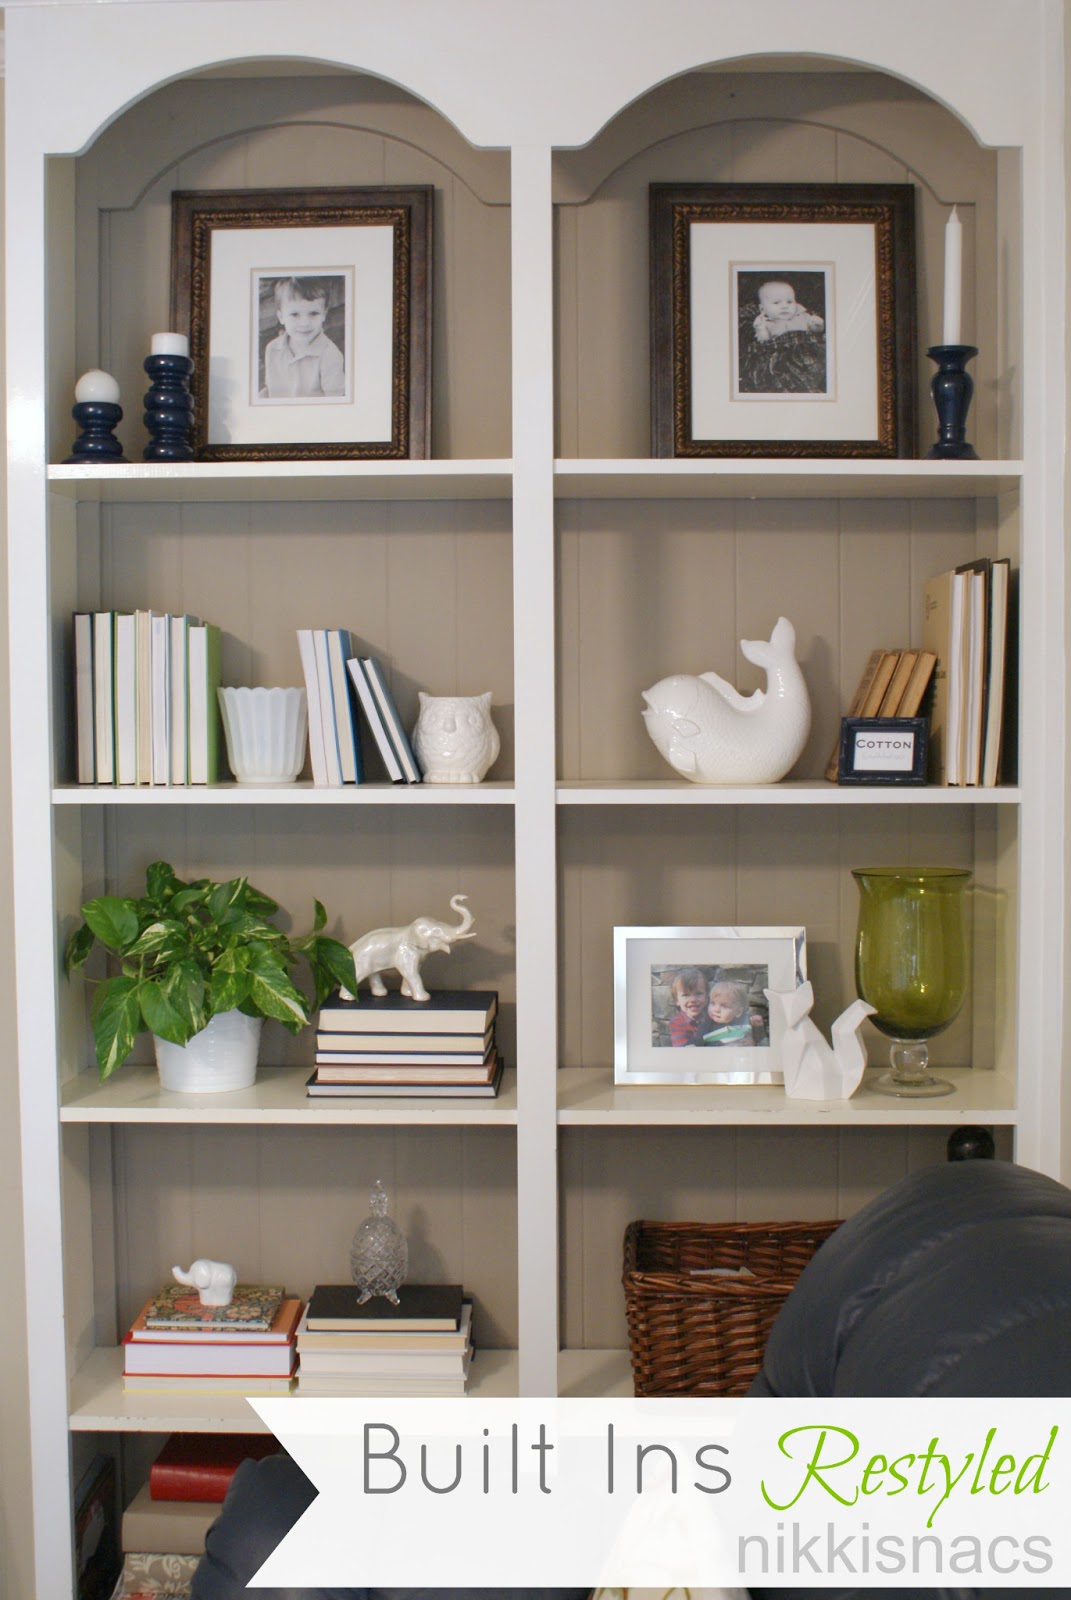 Nikkis' Nacs: The Built Ins - Restyled